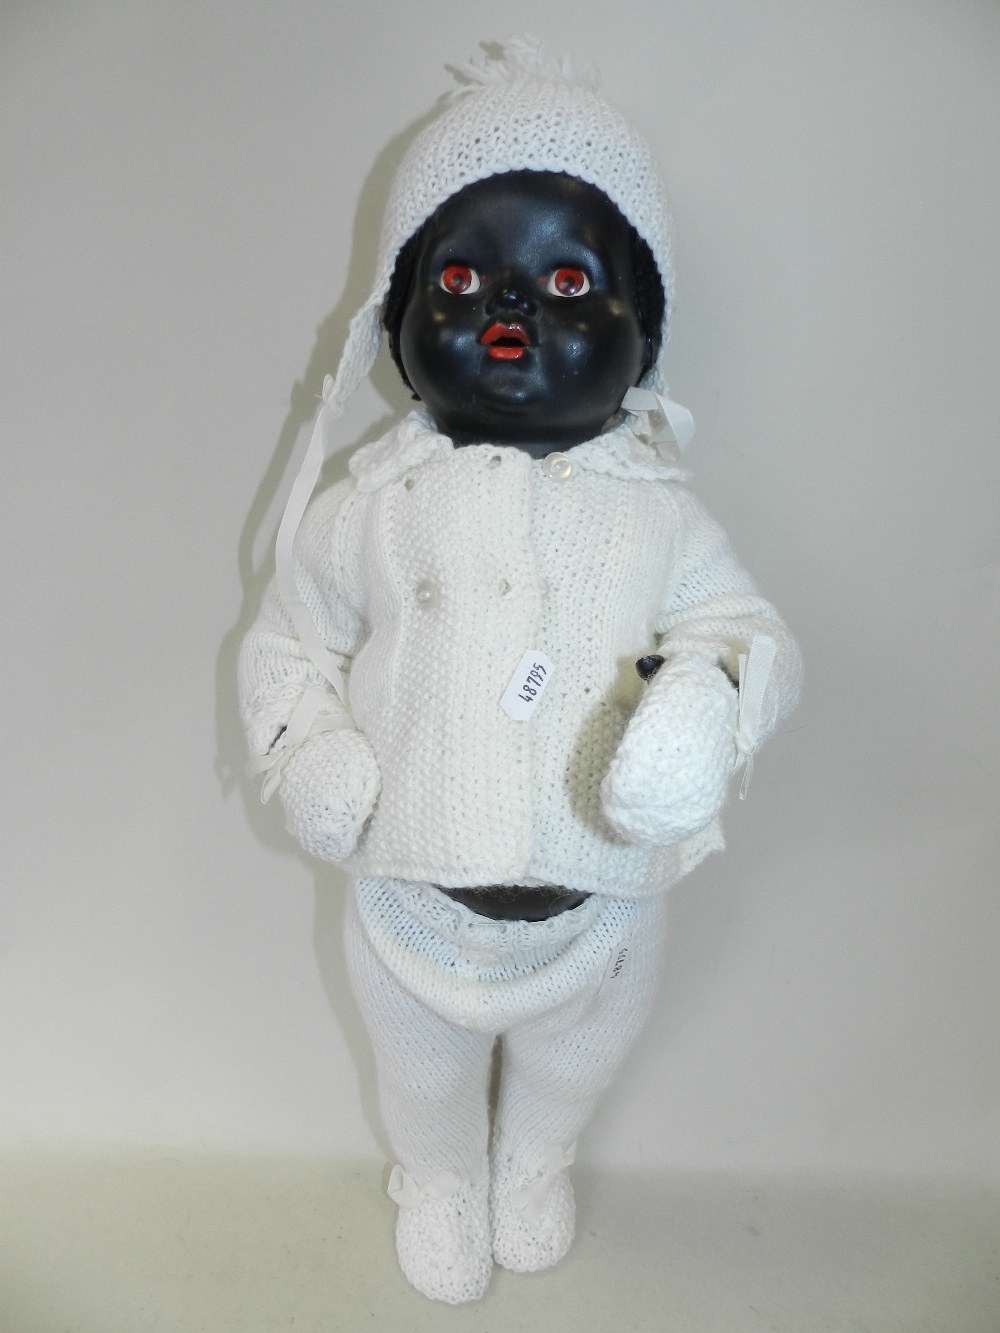 A black baby doll with jointed arms and legs and sleeping brown eyes